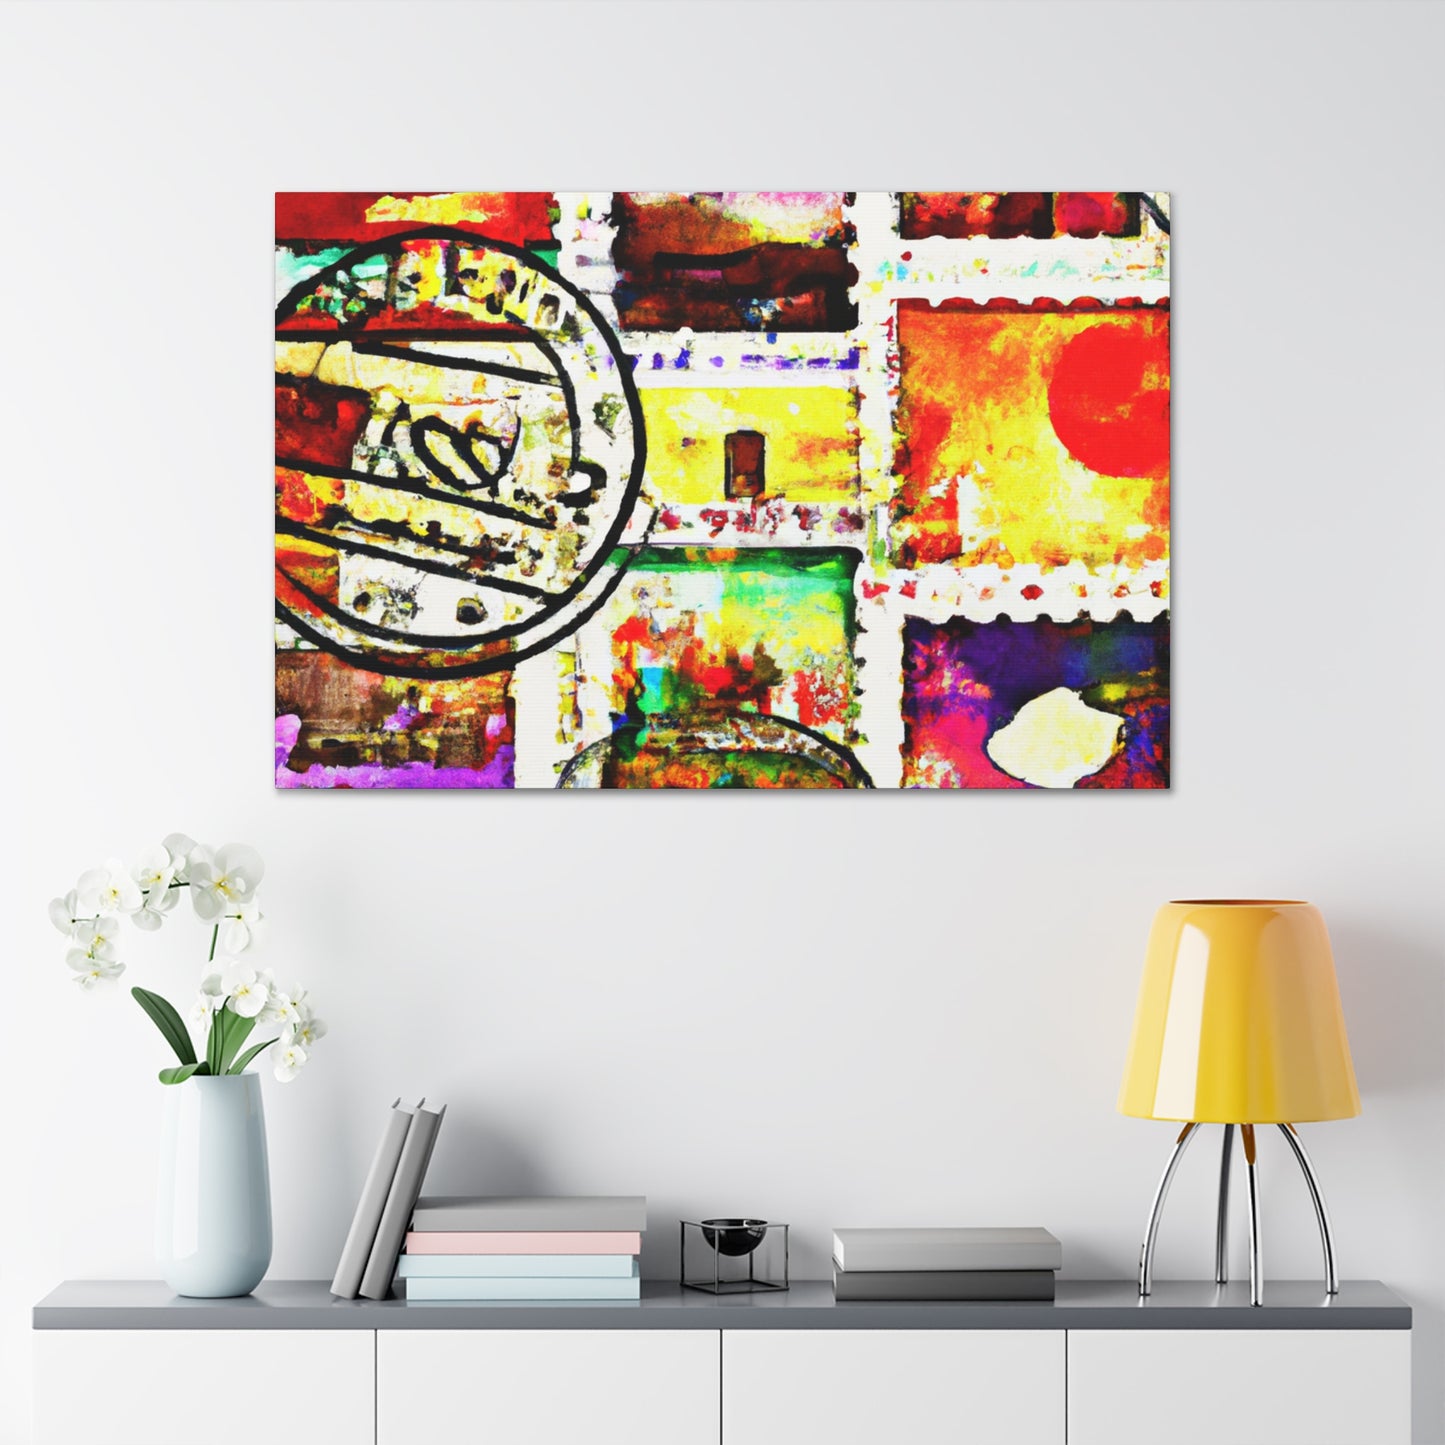 Timeless Treasures: Global Philatelic Stamps. - Postage Stamp Collector Canvas Wall Art